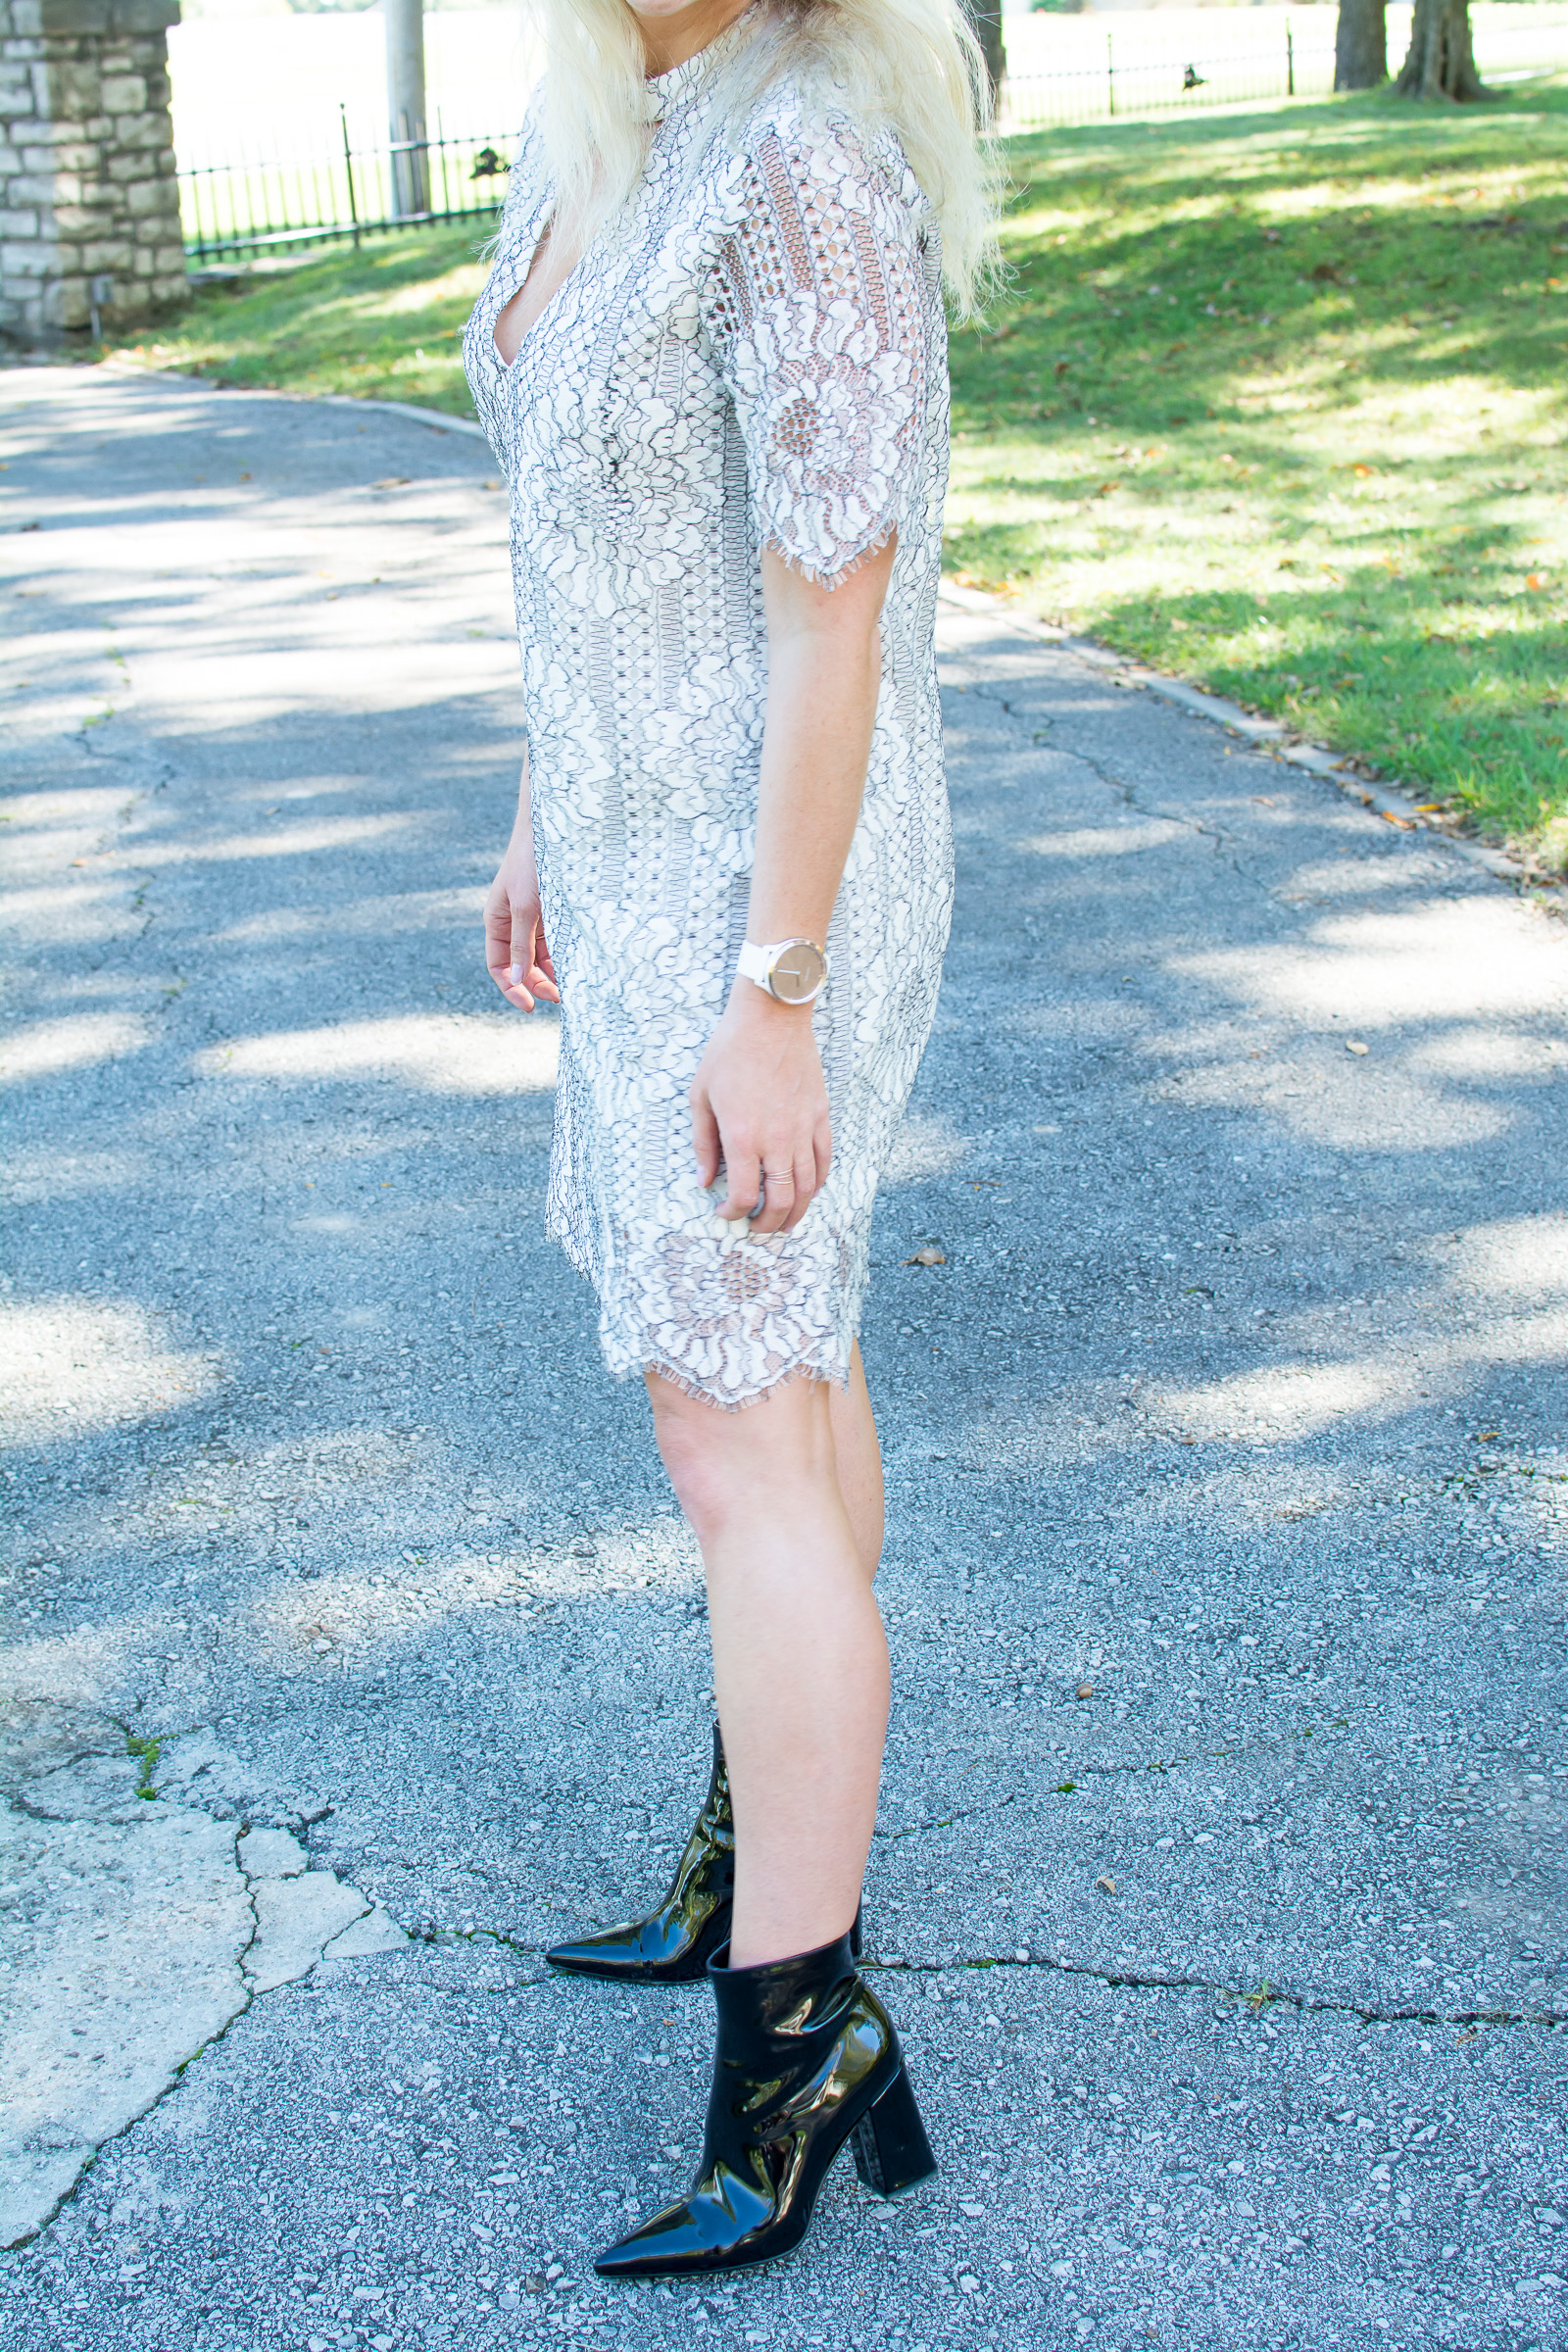 Wearing a White Lace Dress for Early Fall. | Ashley from LSR